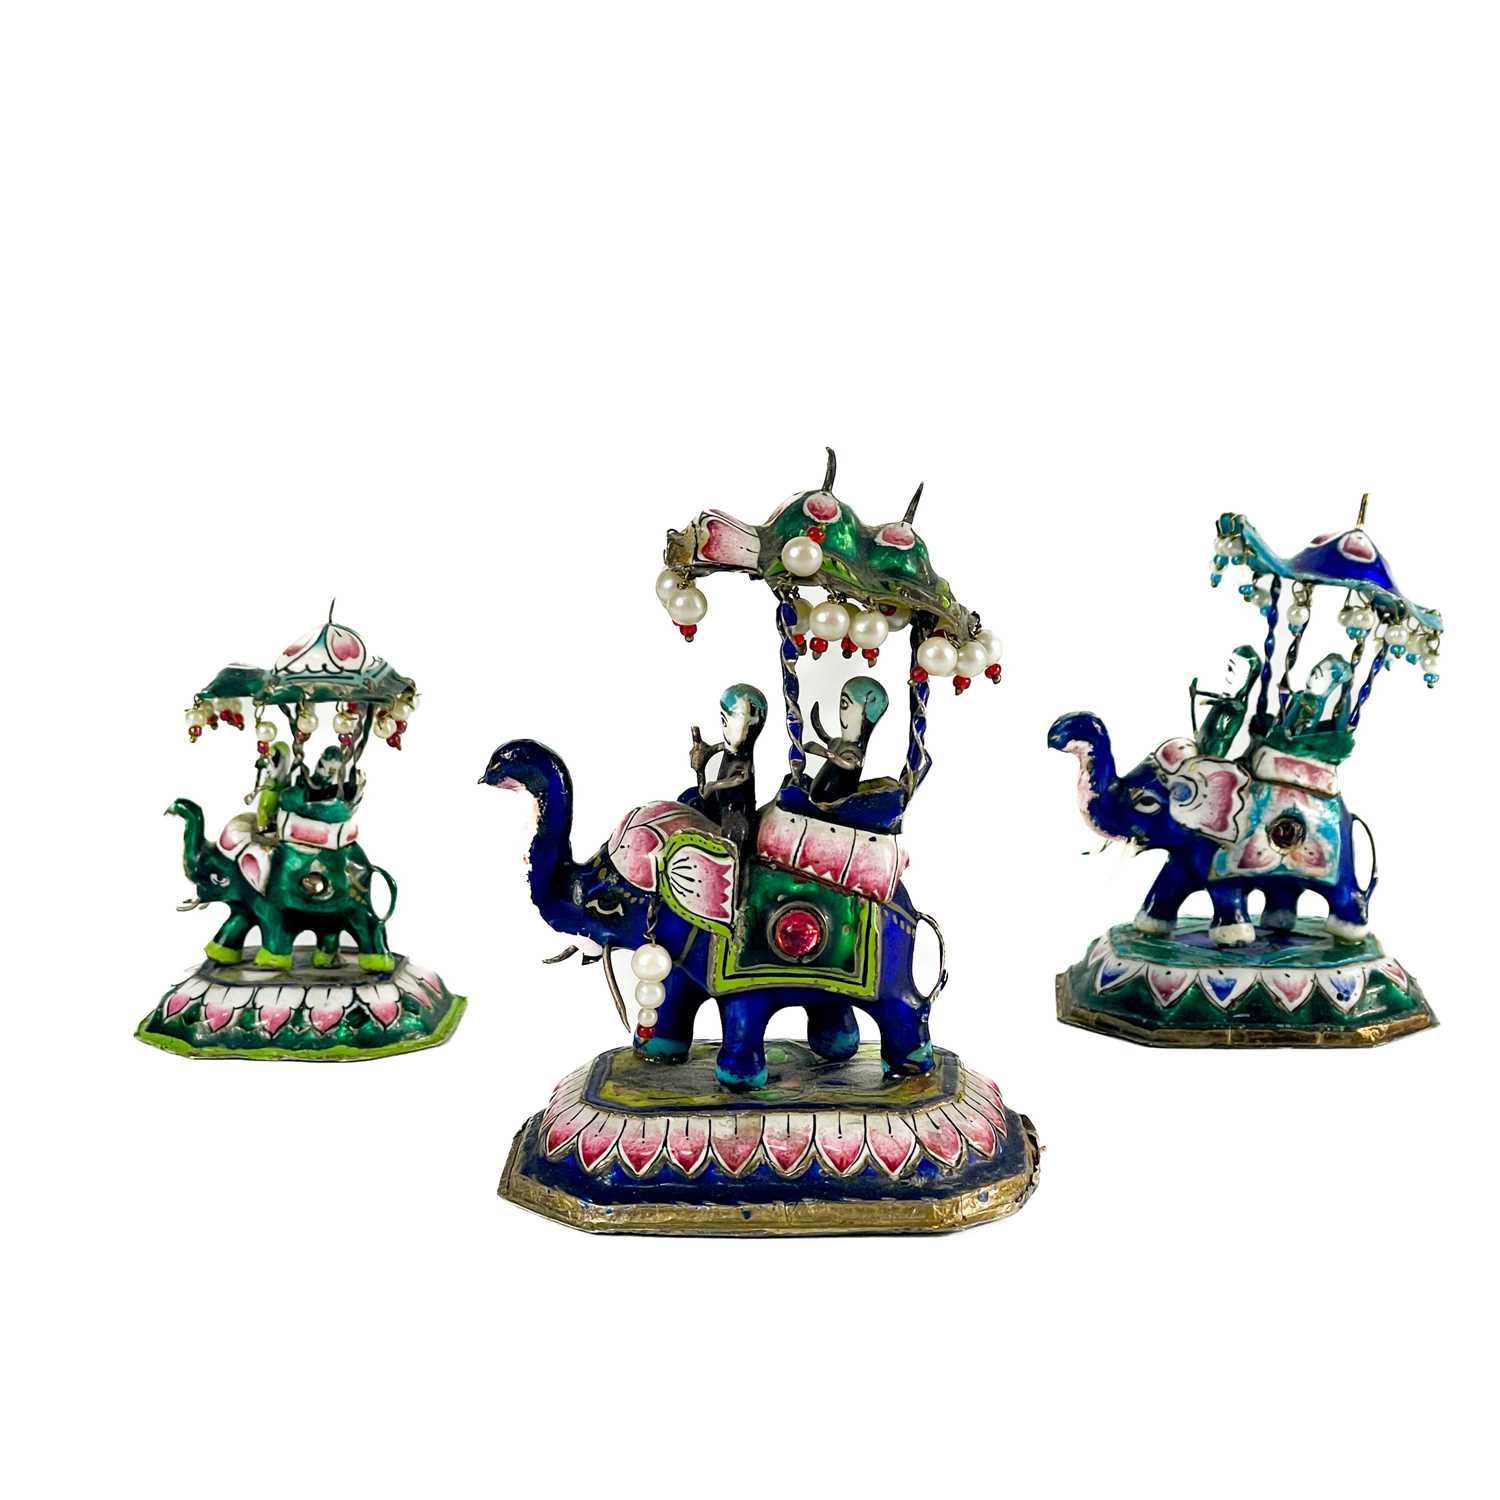 Lot 17 - Three Indian silver and polychrome enamel chess pieces, early-mid 20th century.